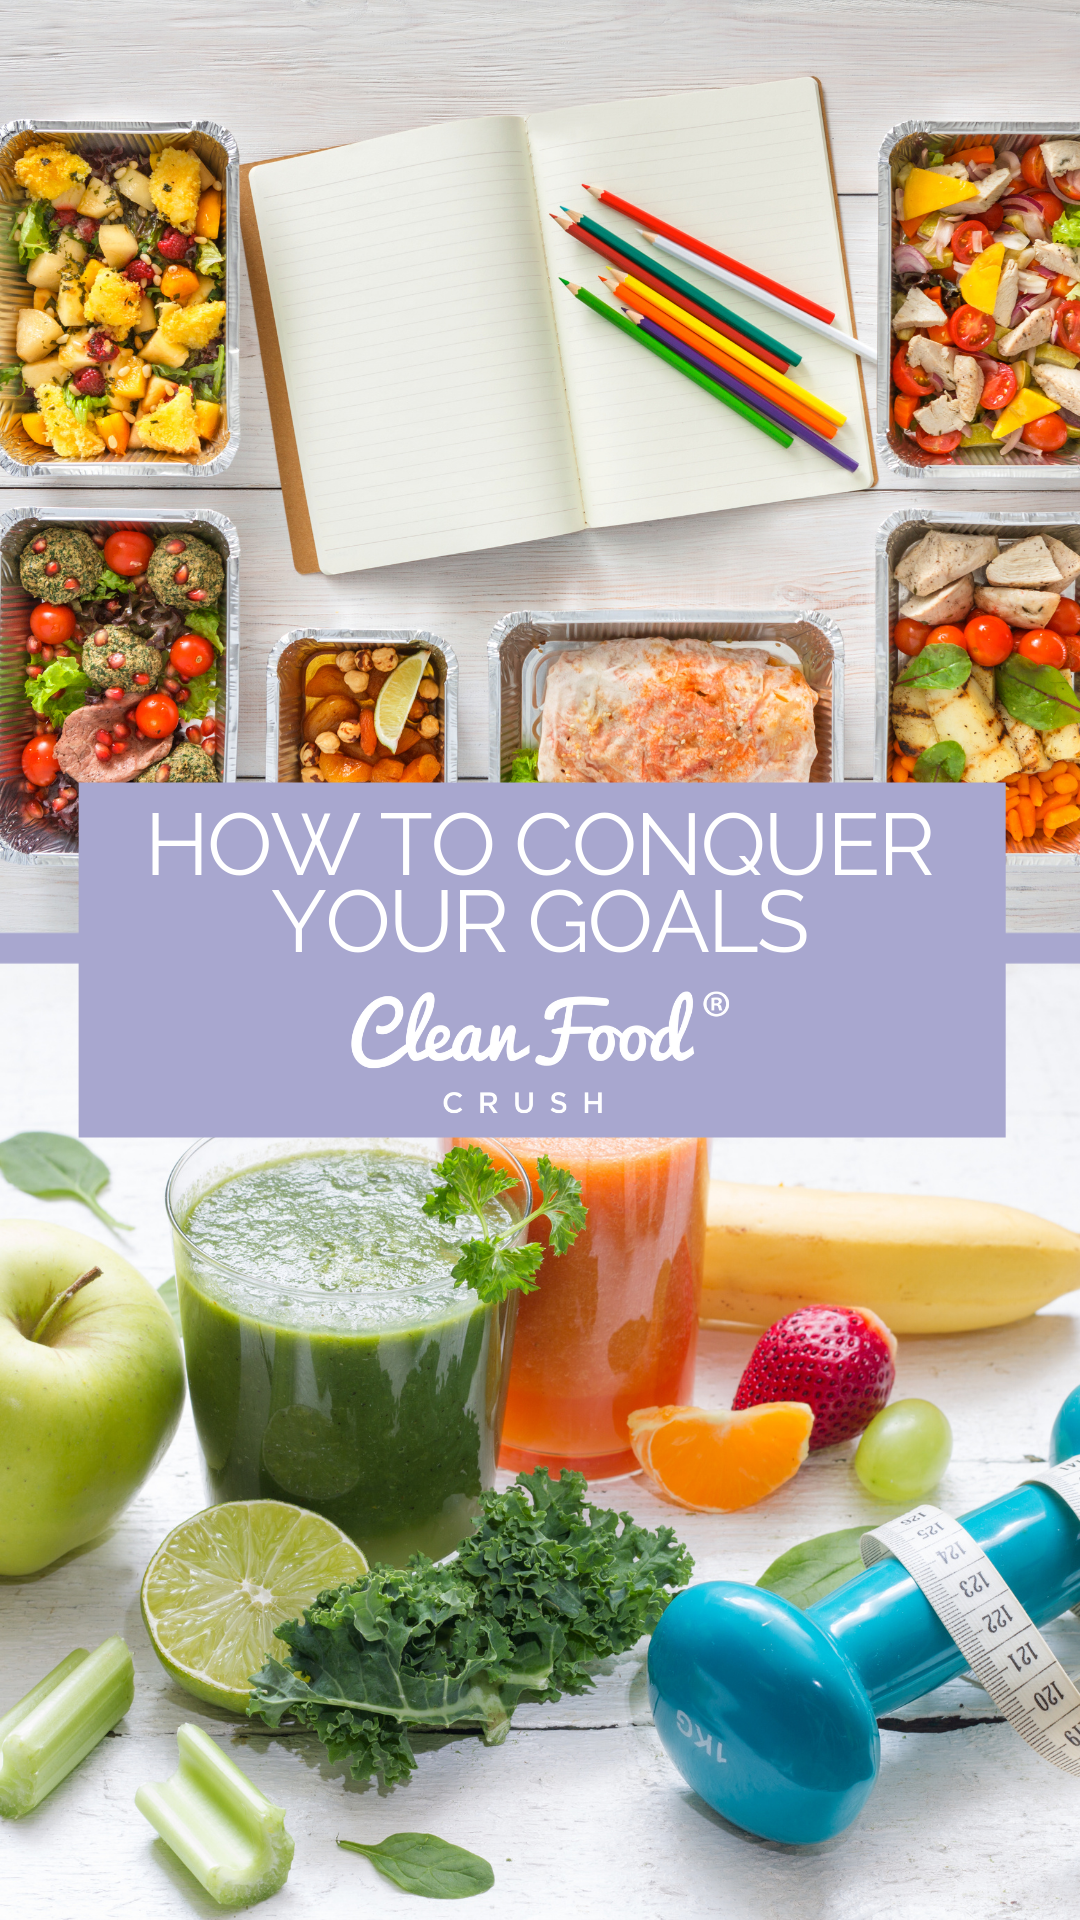 https://cleanfoodcrush.com/wp-content/uploads/2022/02/10-ways-to-conquer-your-goals.png